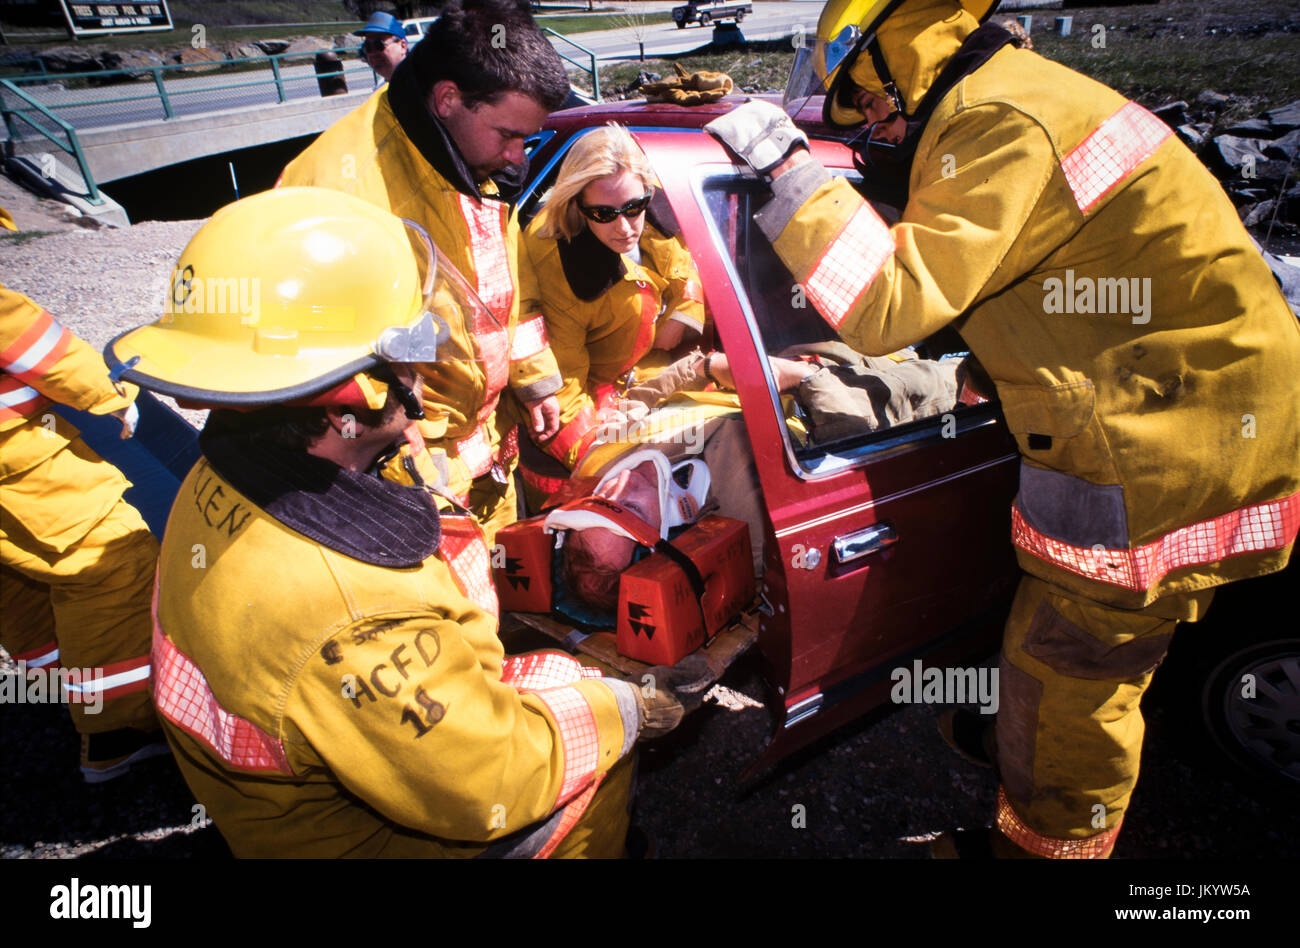 South Dakota firefighters take part in victim extrication training during a motor vehicle crash scenario using hydraulic prying and cutting tools. Stock Photo